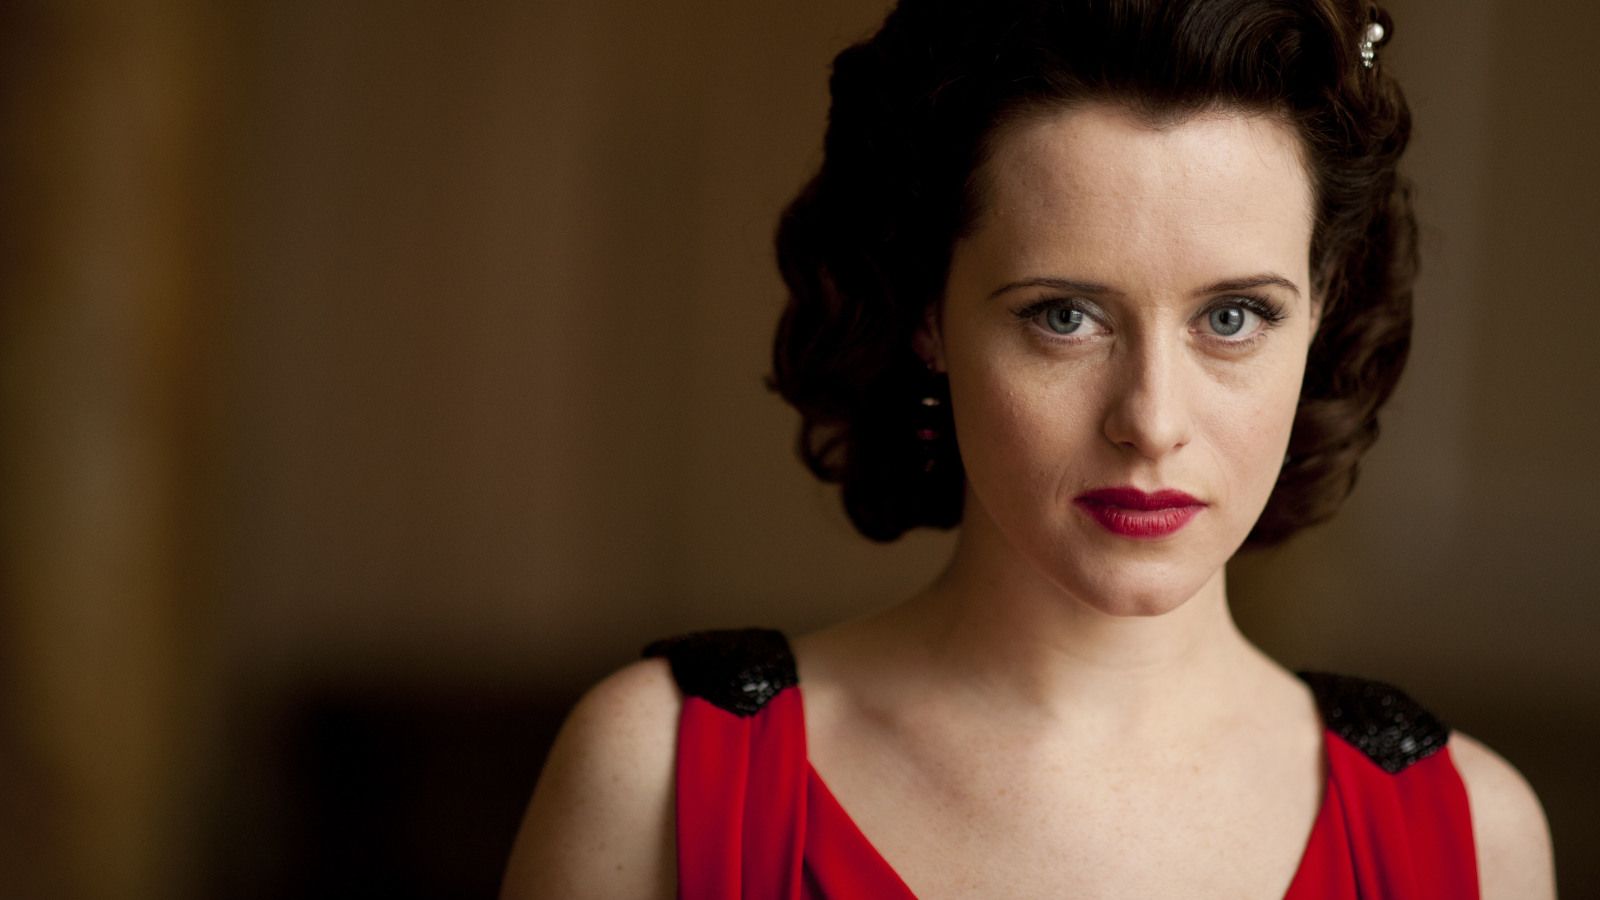 Claire Foy Portrait In Red 1600x900 Resolution Wallpaper, HD Celebrities 4K Wallpaper, Image, Photo and Background